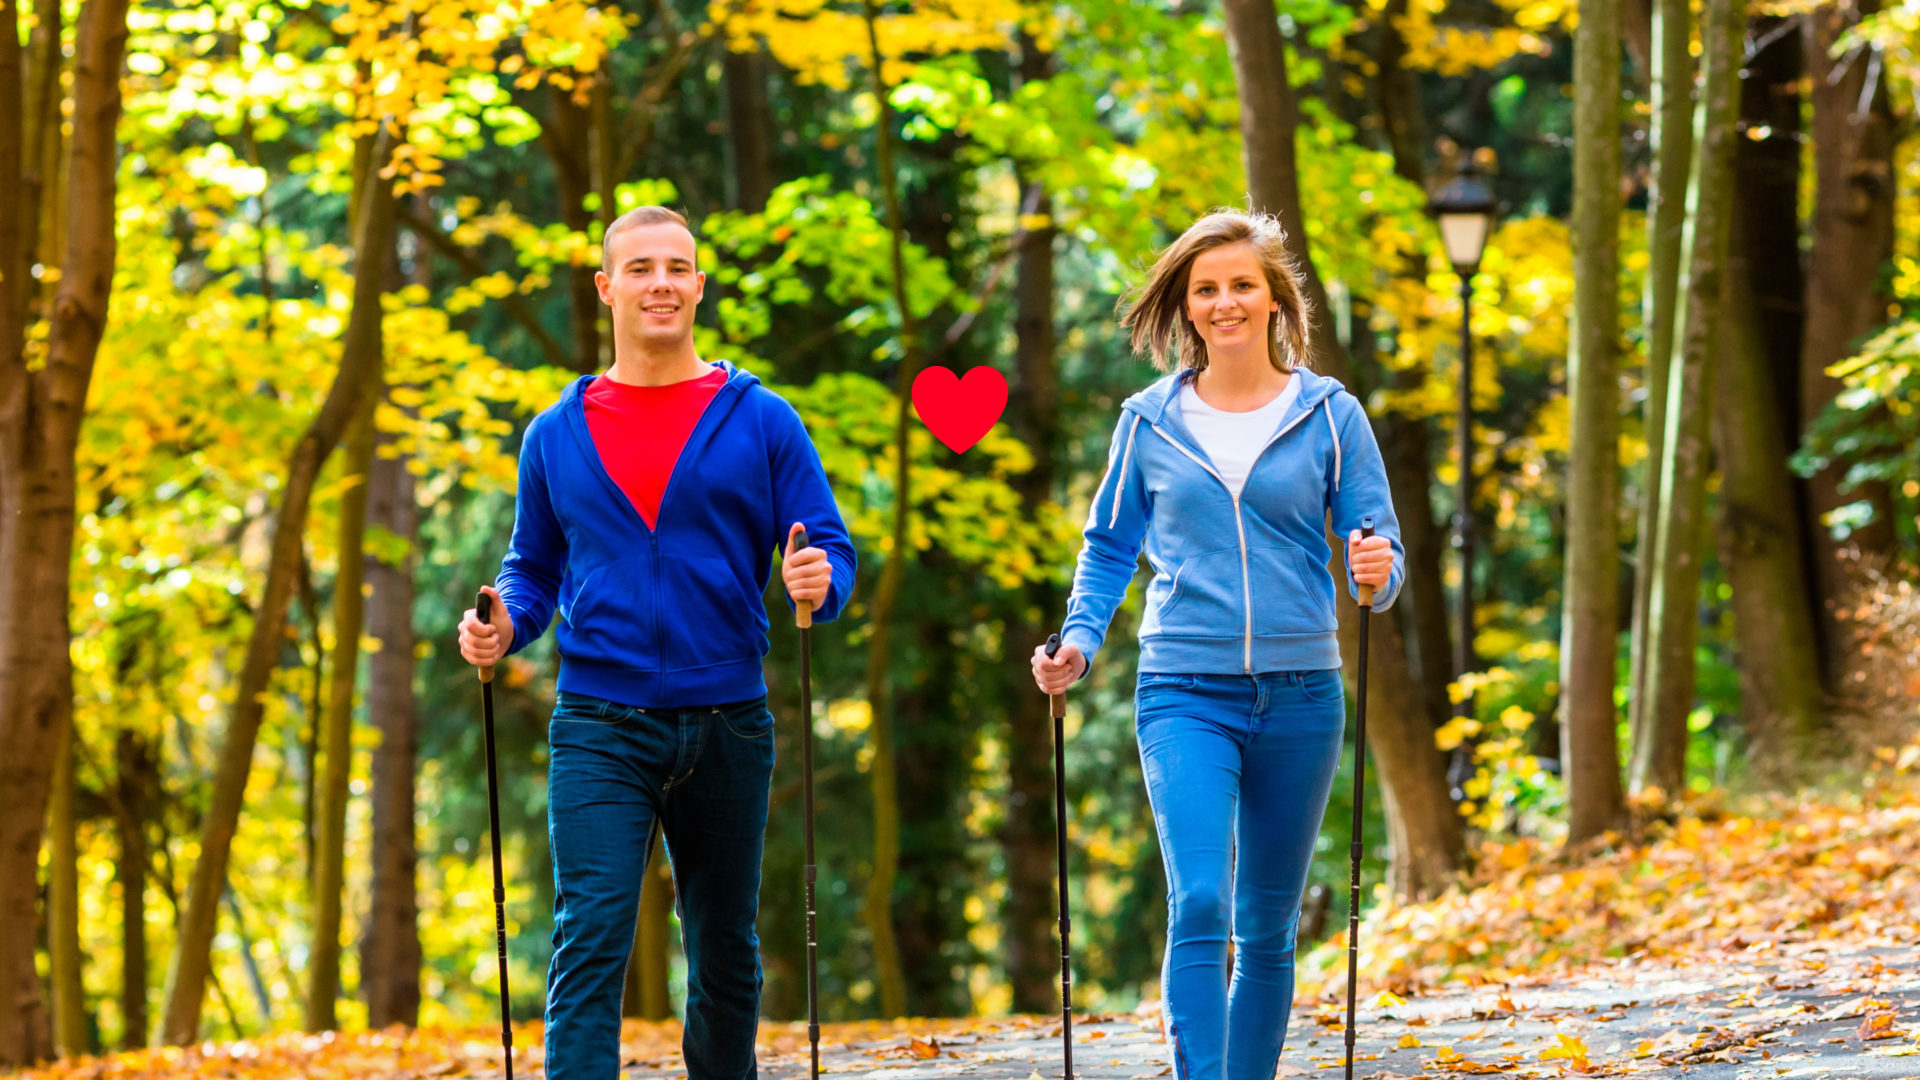 A film poster depicting a woman and a man Nordic walking on a forest path in autumn.